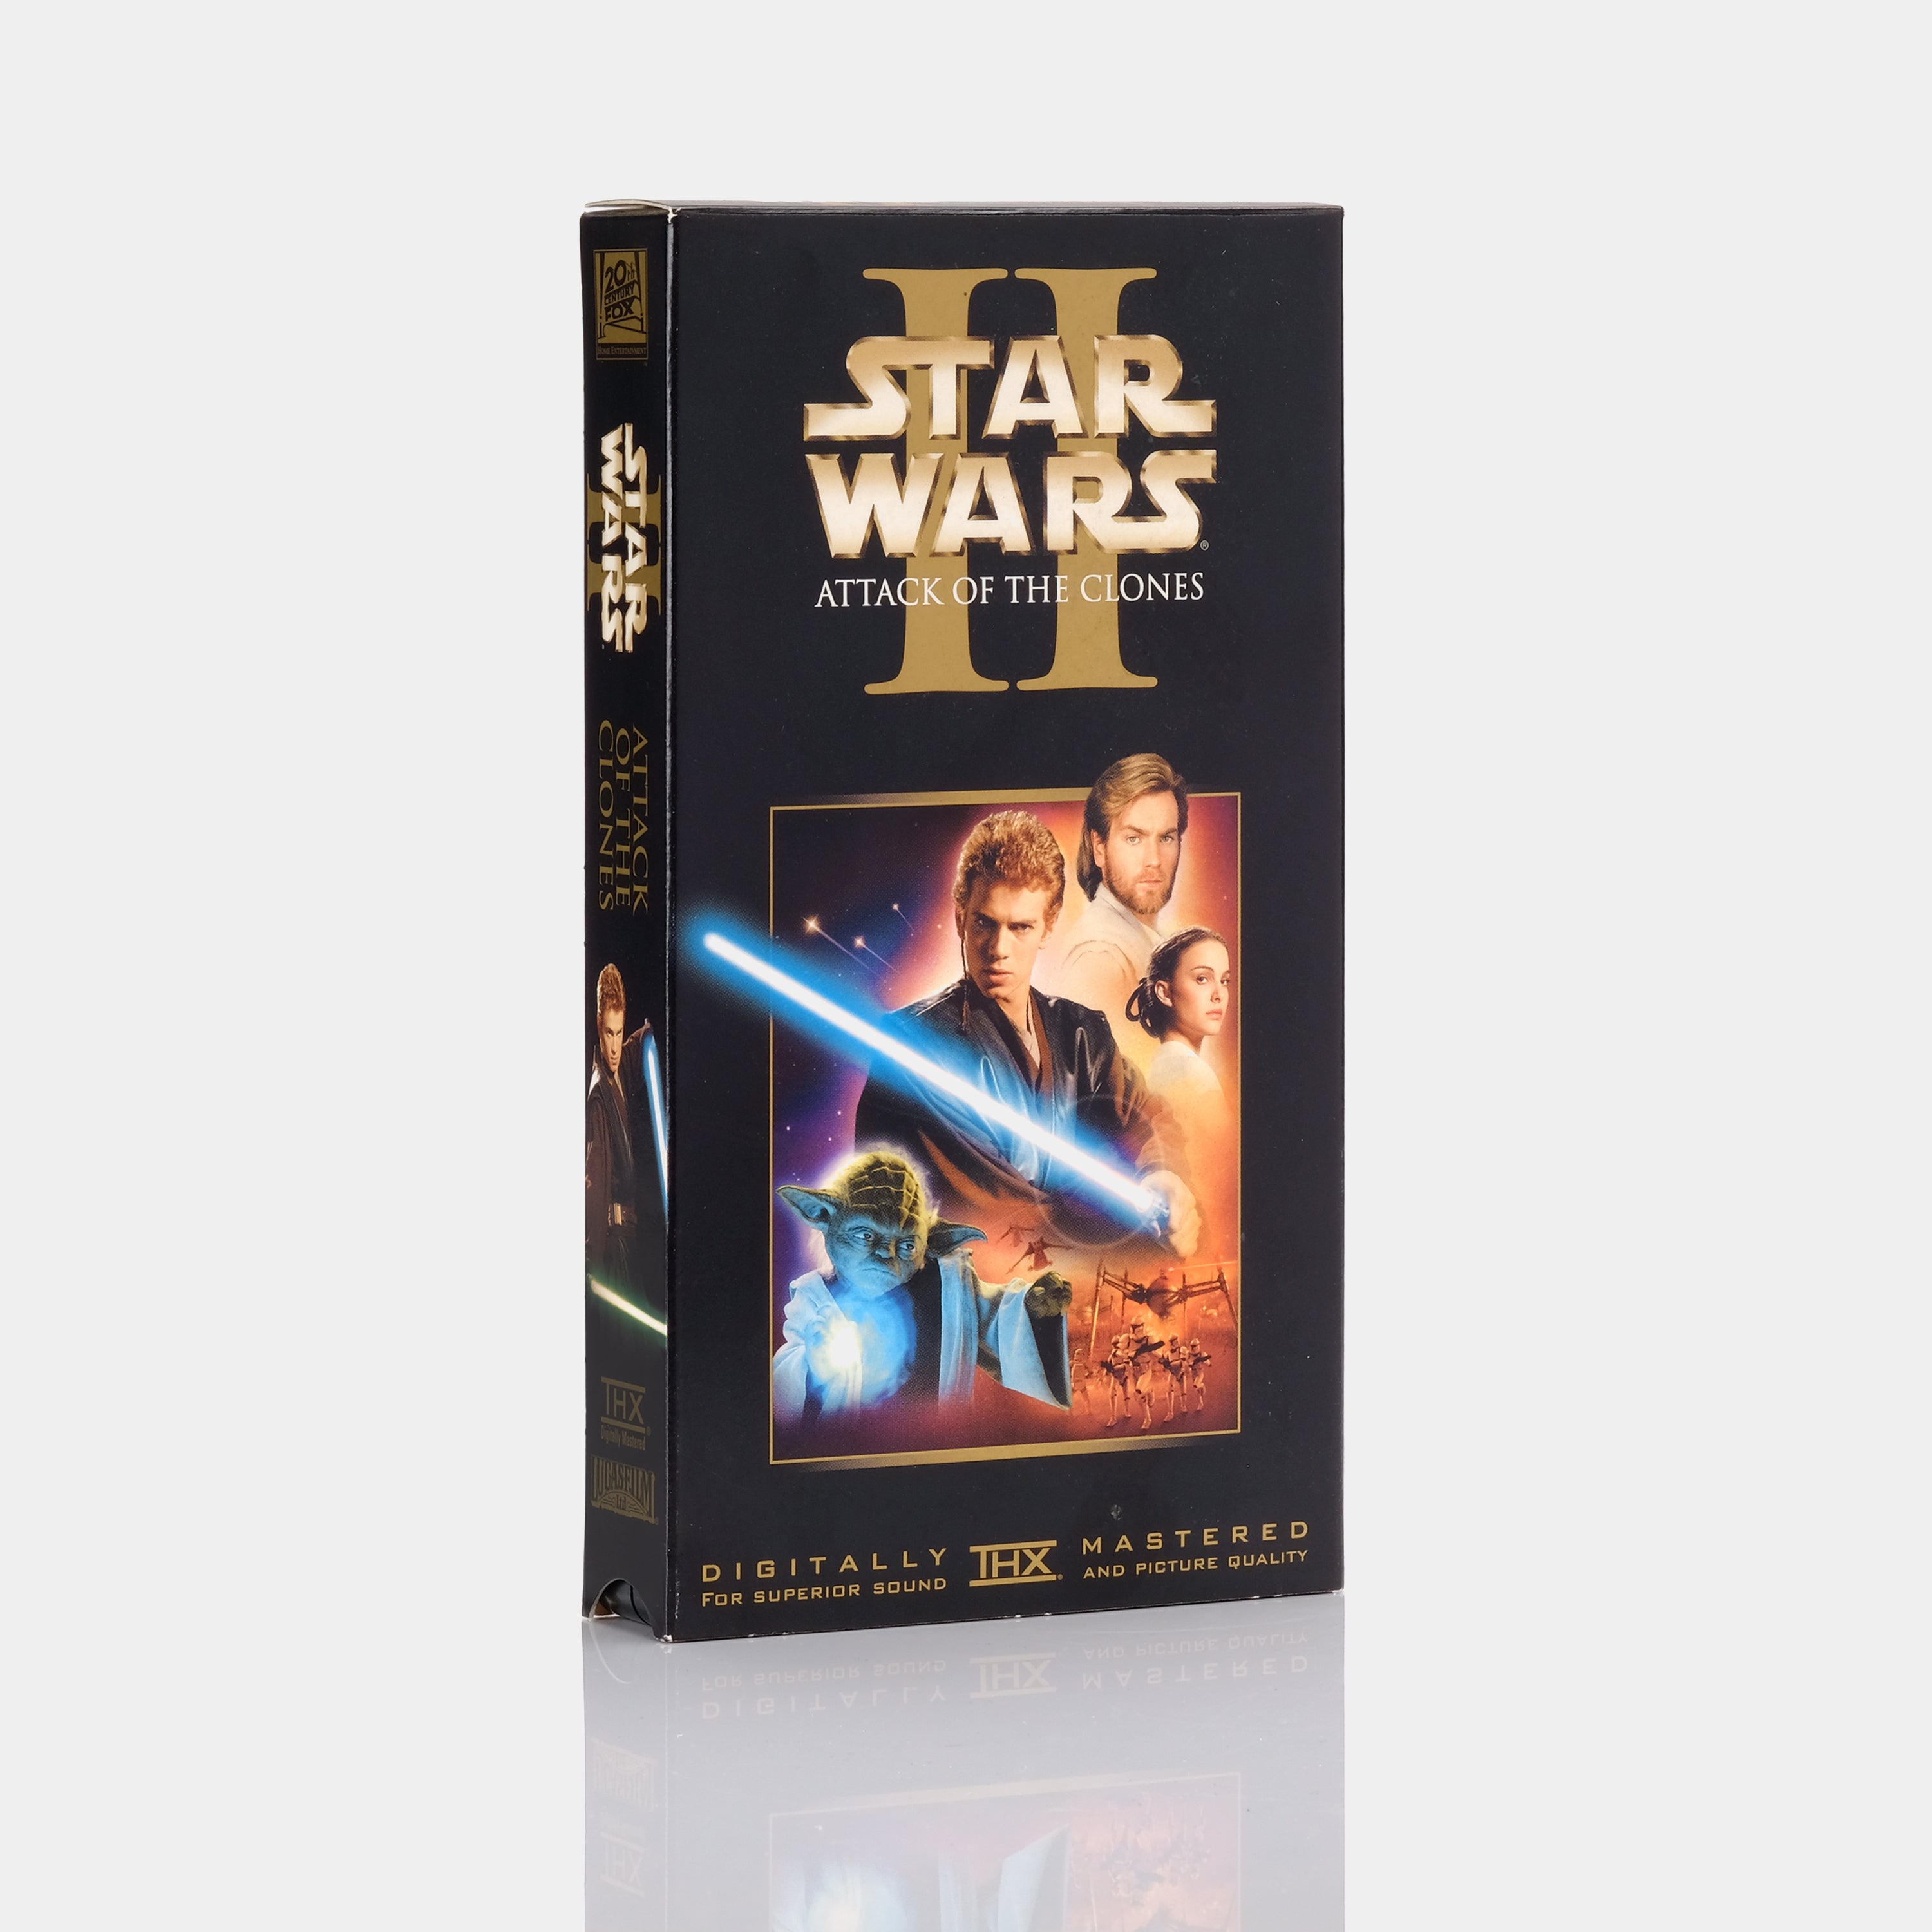 Star Wars: Episode II - Attack of the Clones VHS Tape